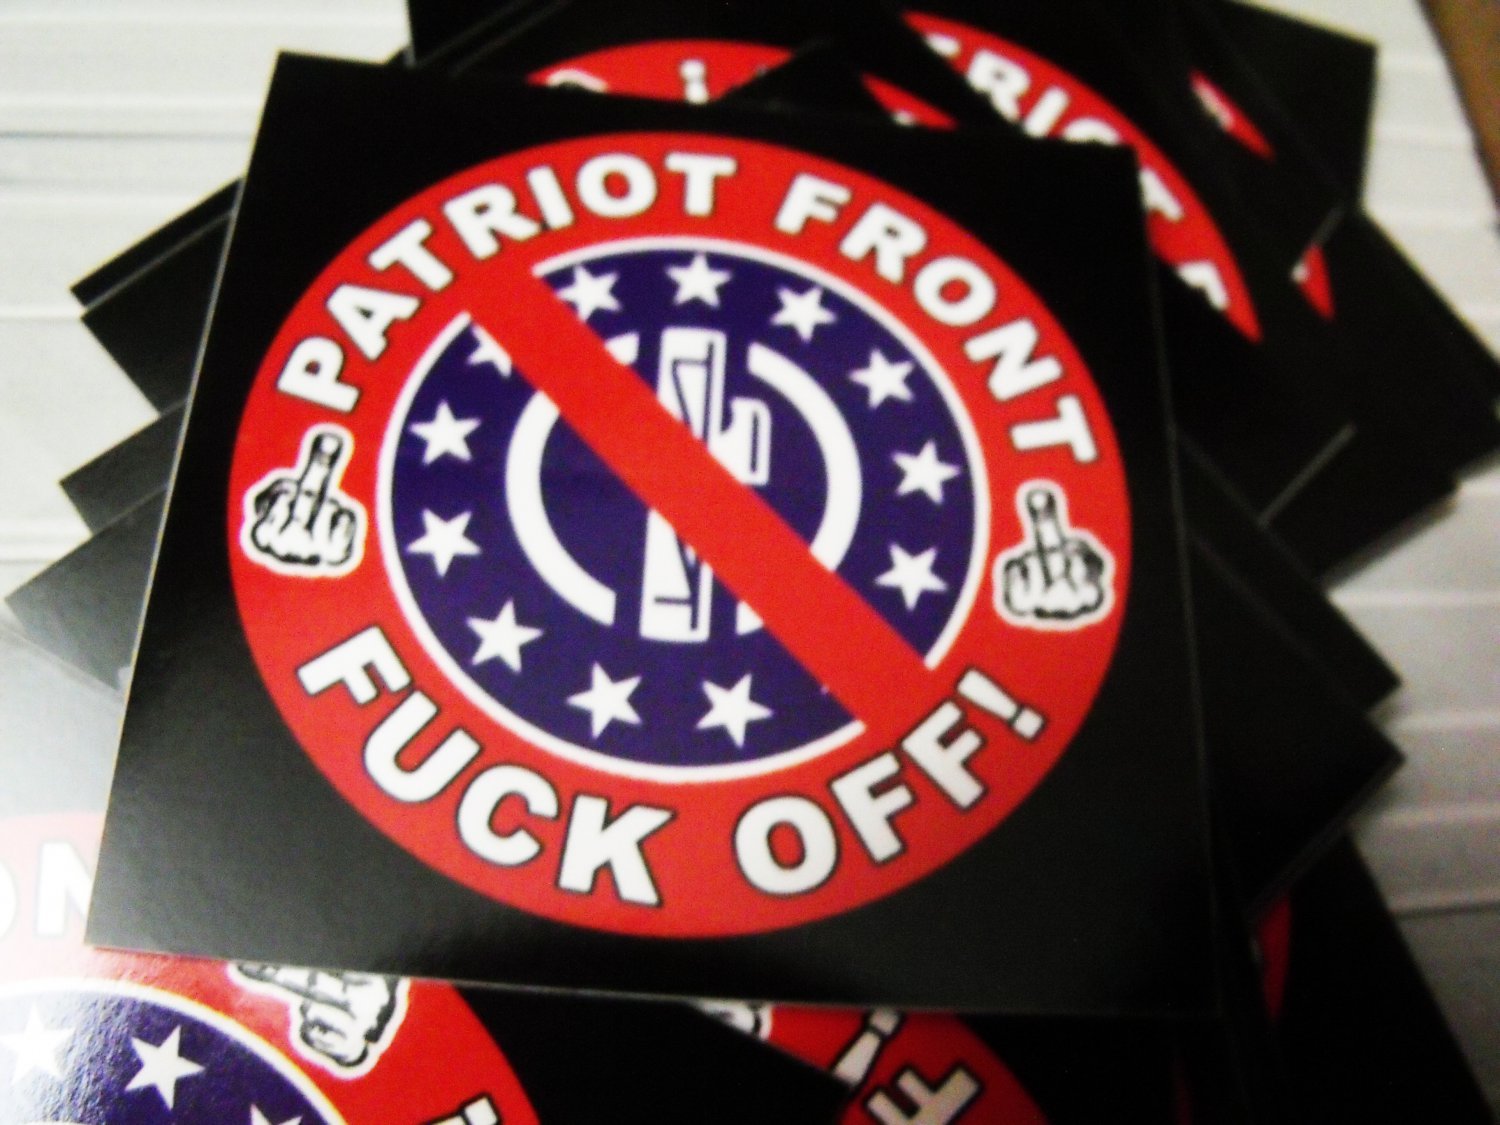 50 PATRIOT FRoNT FUCK OFF 2.5" x 2.5" stickers